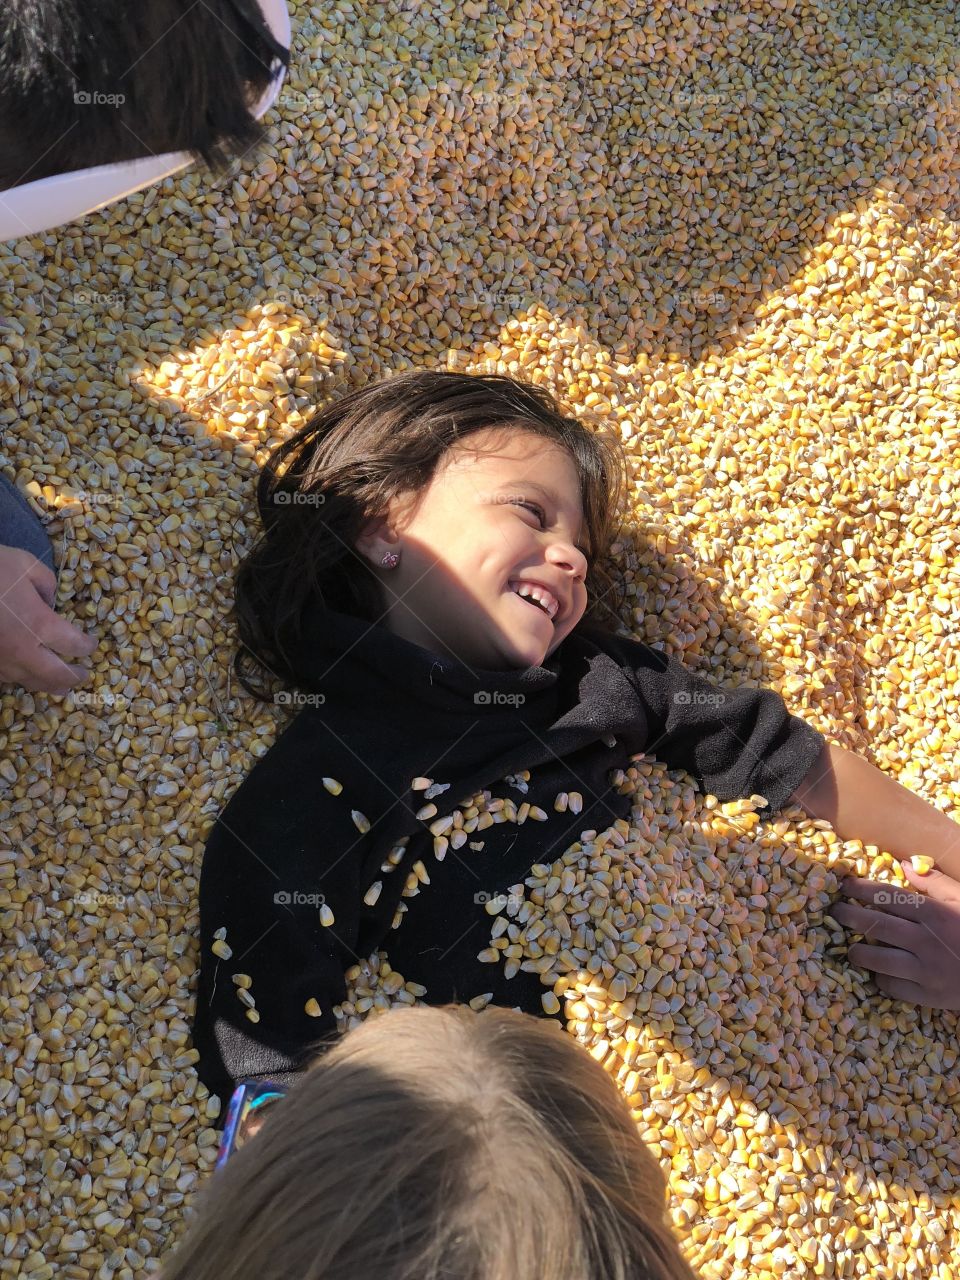 Laughing in the corn